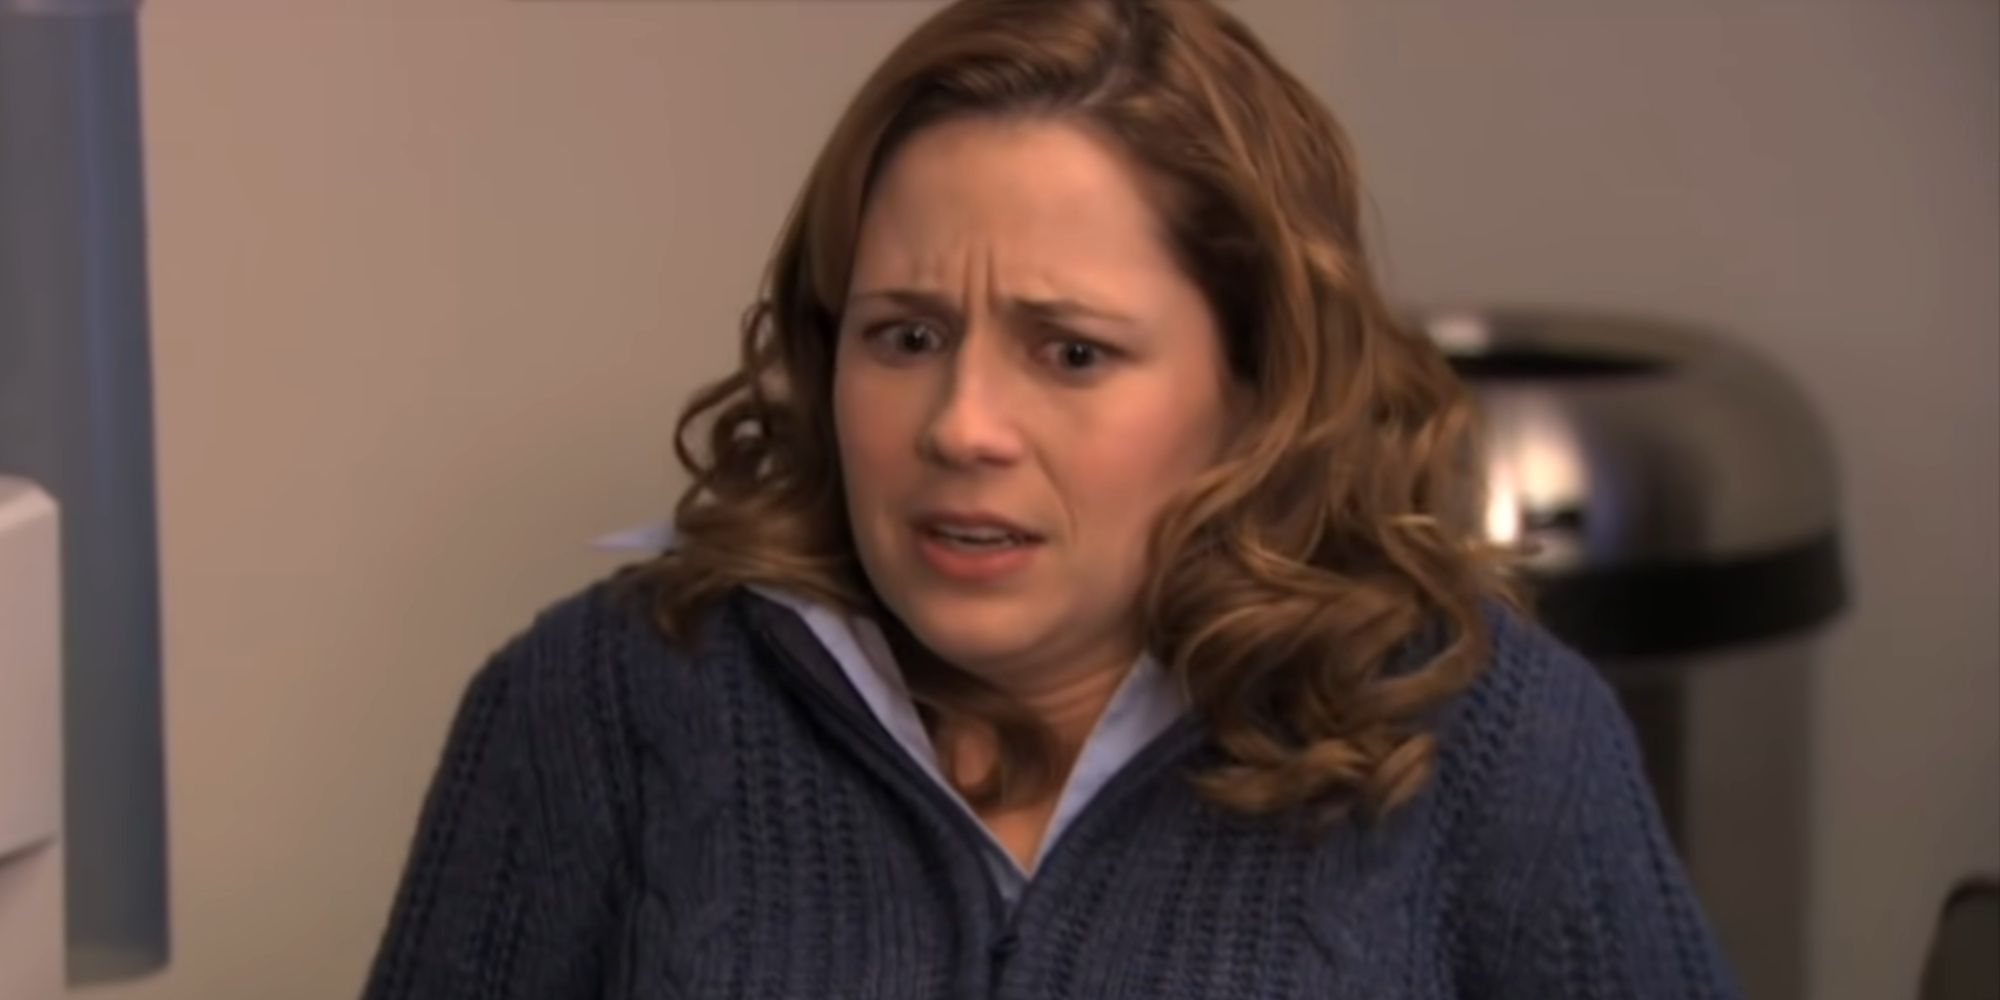 The Office Season 6 Pam Beesley The Deliver Jenna Fischer